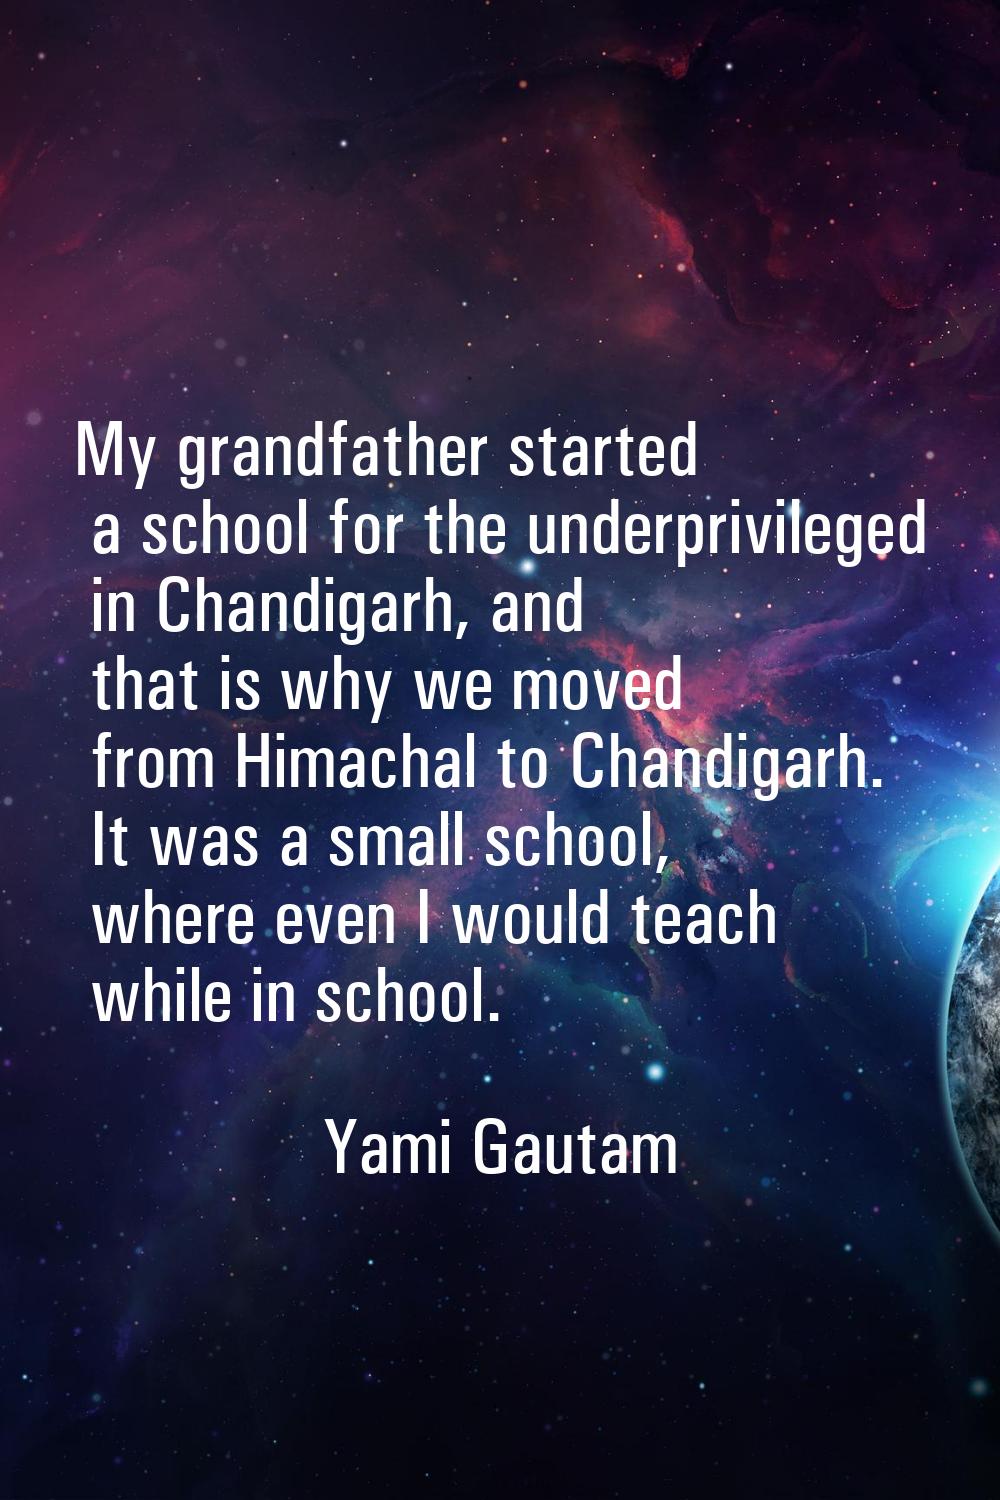 My grandfather started a school for the underprivileged in Chandigarh, and that is why we moved fro